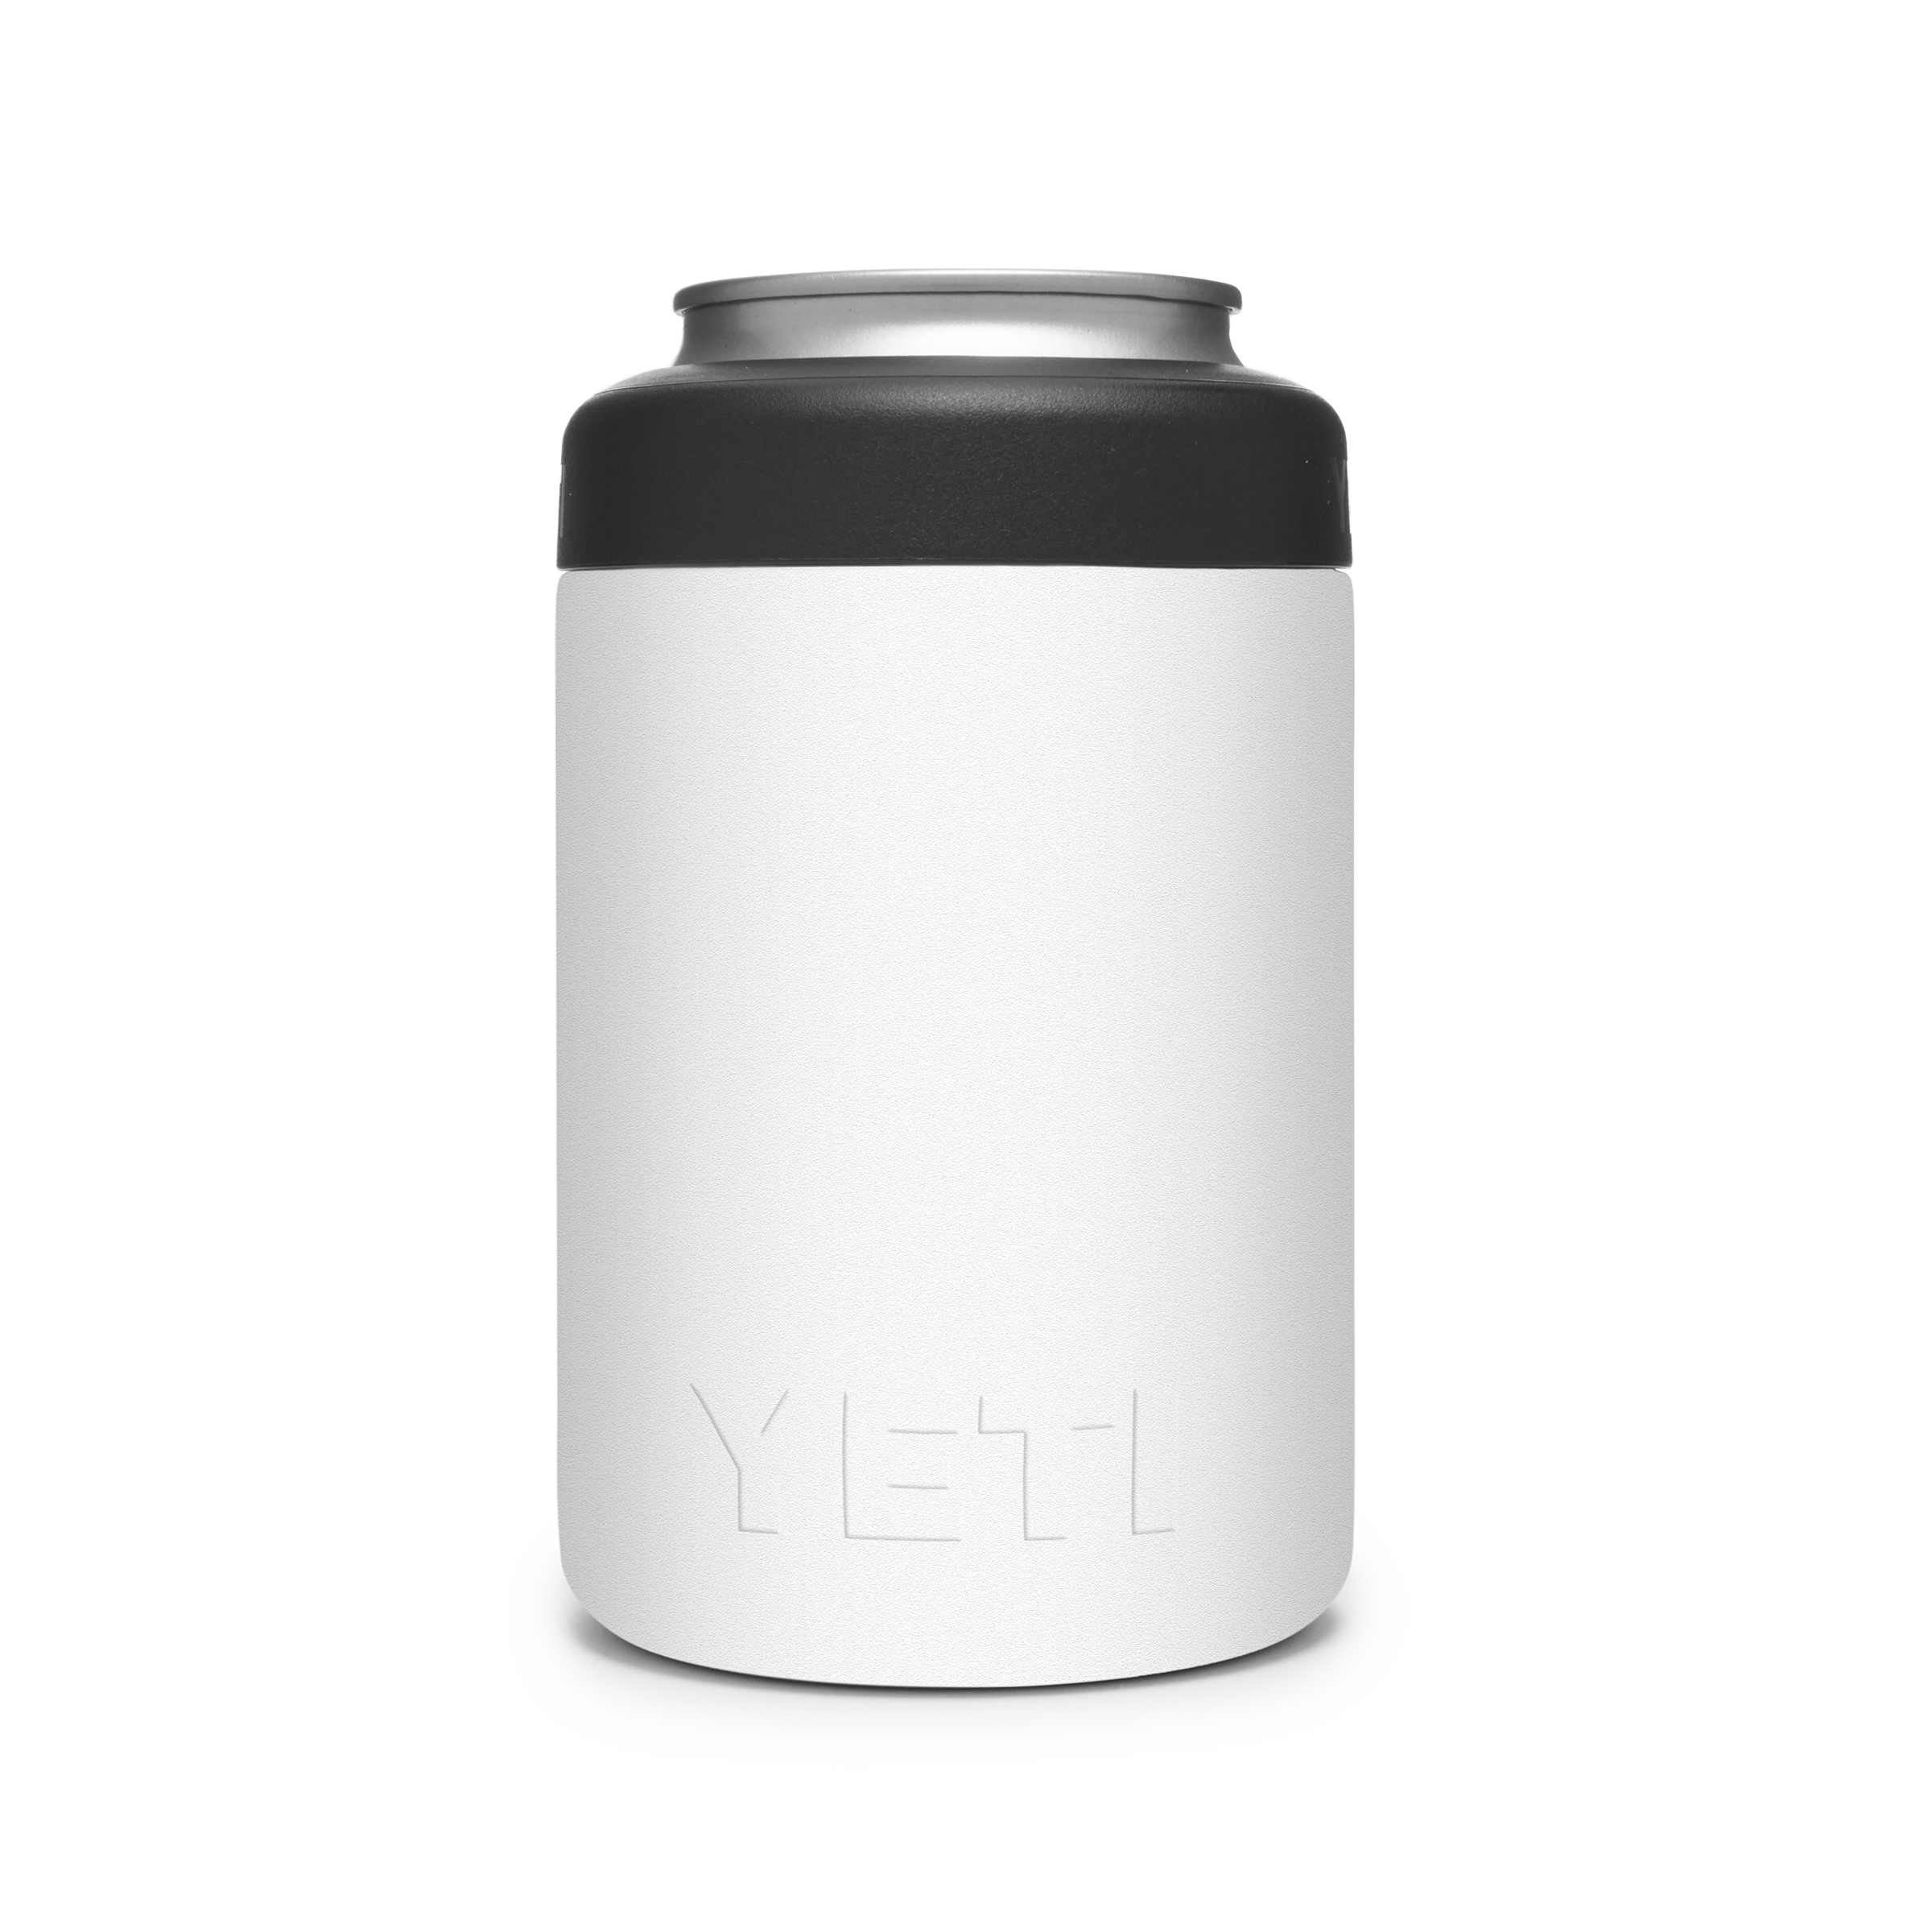 The YETI Rambler Colster 99-Minute Cold Beer Koozie Challenge (VIDEO  REVIEW)